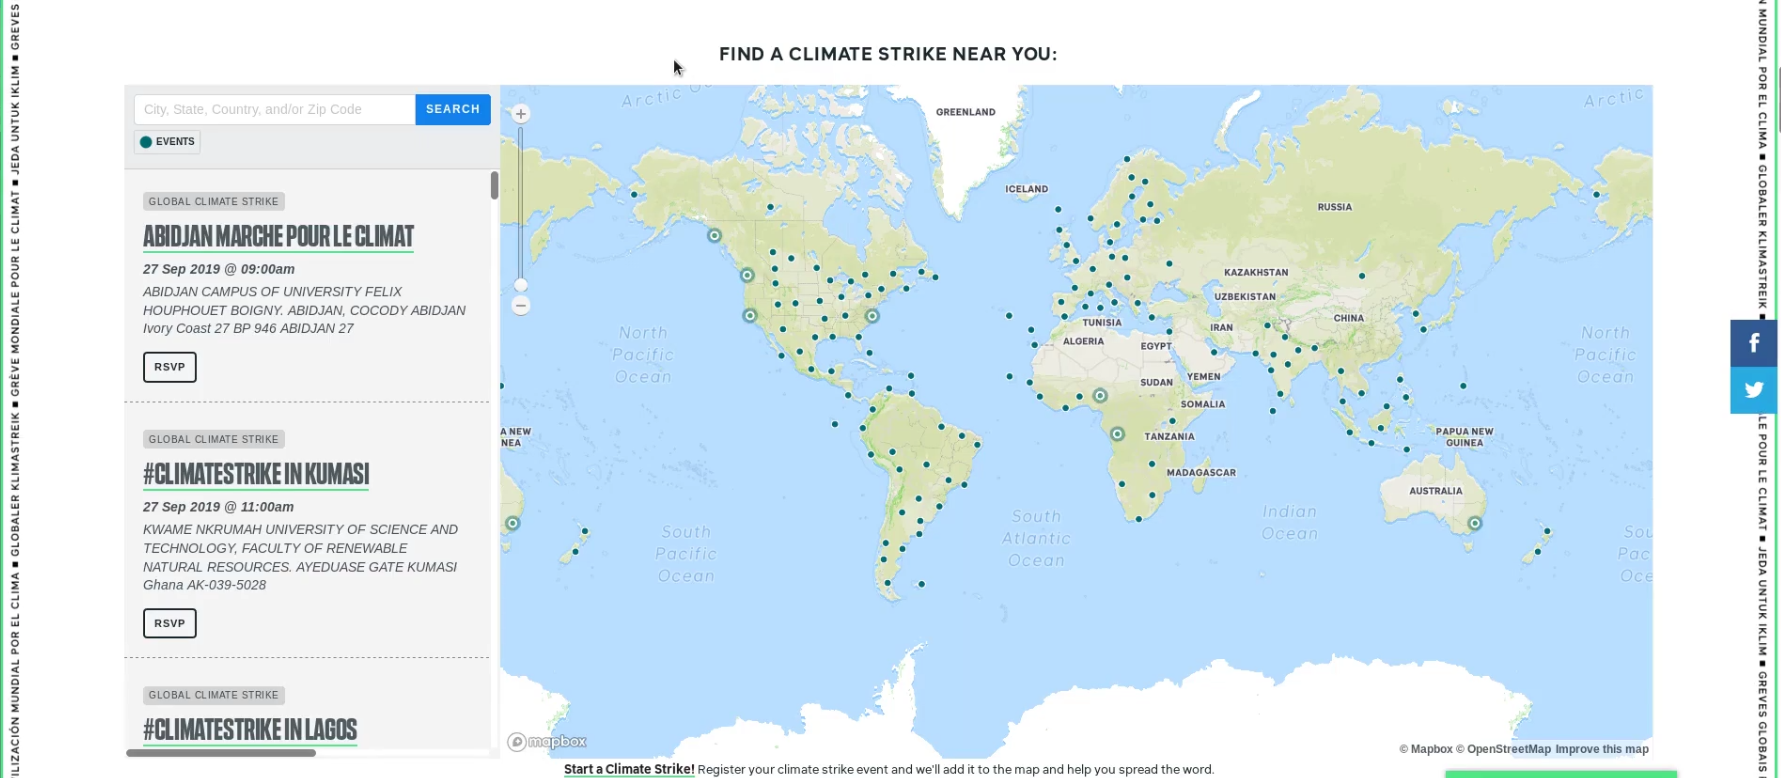 350.org's climate action map.